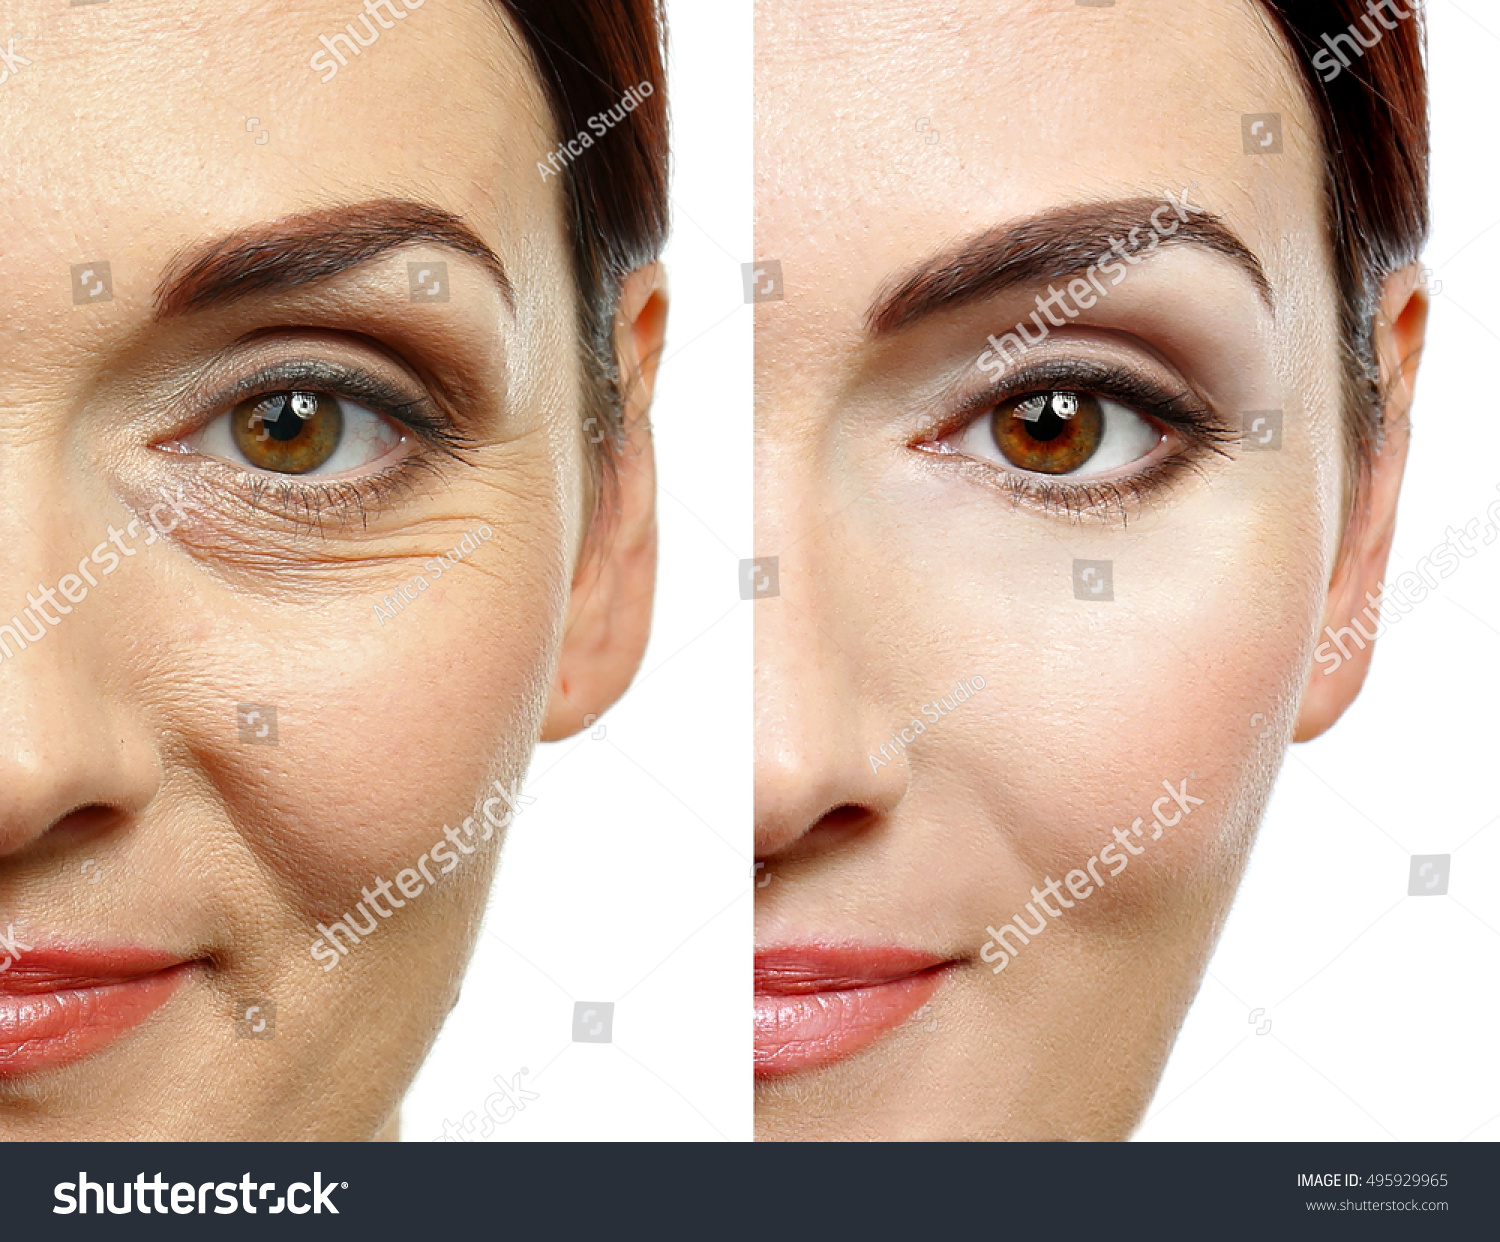 Woman face before and after cosmetic procedure. Plastic surgery concept. #495929965